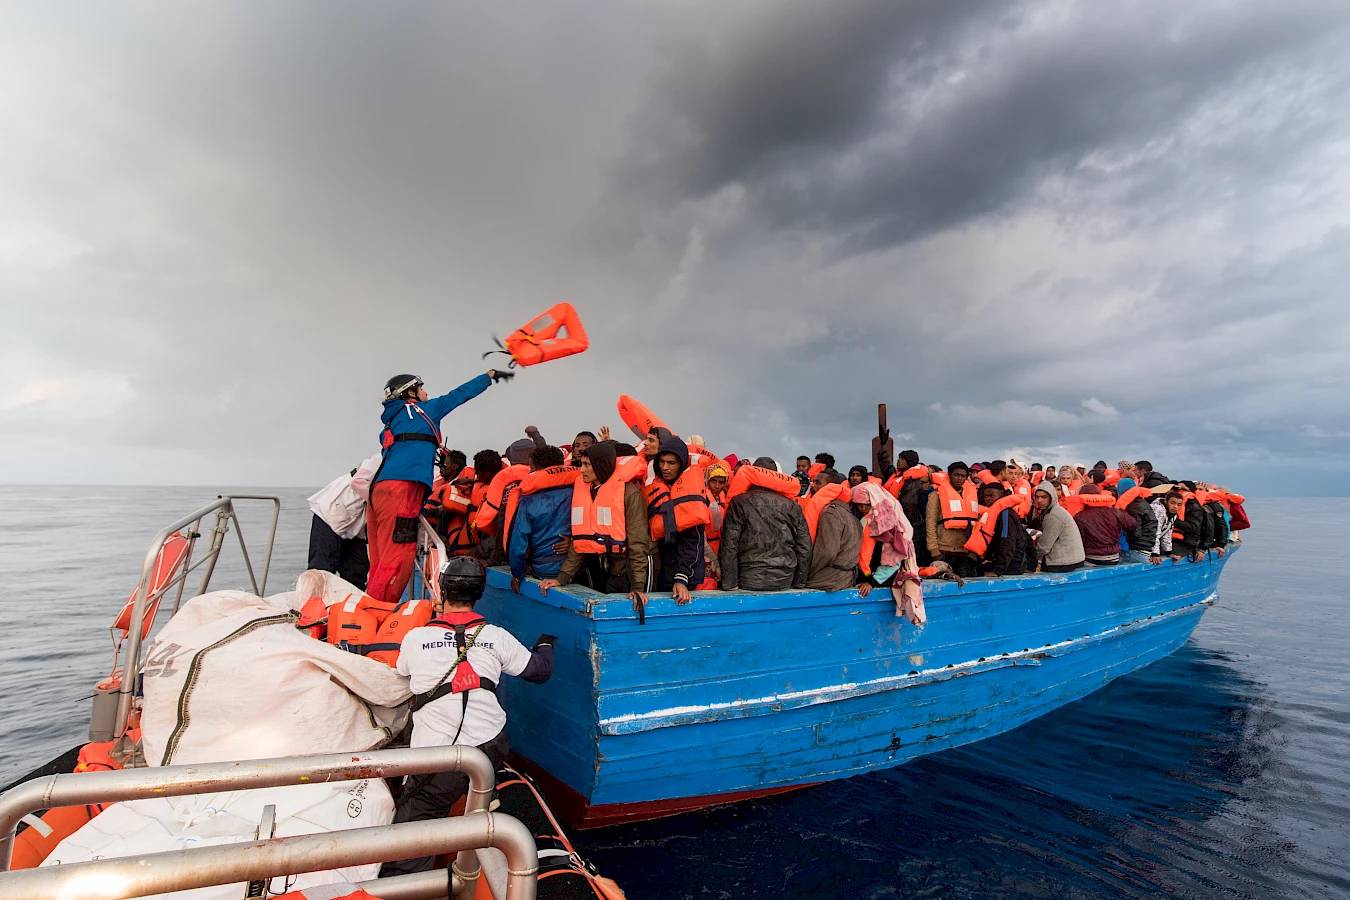 In collaboration with Médecins Sans Frontières/Doctors Without Borders (MSF), the organization SOS Méditerranée rescues refugees in distress off the Libyan coast. The photographer accompanied the NGOs and documented the rescue missions in the sea and the life on board the Aquarius, December 2016. Photo: Laurin Schmid.